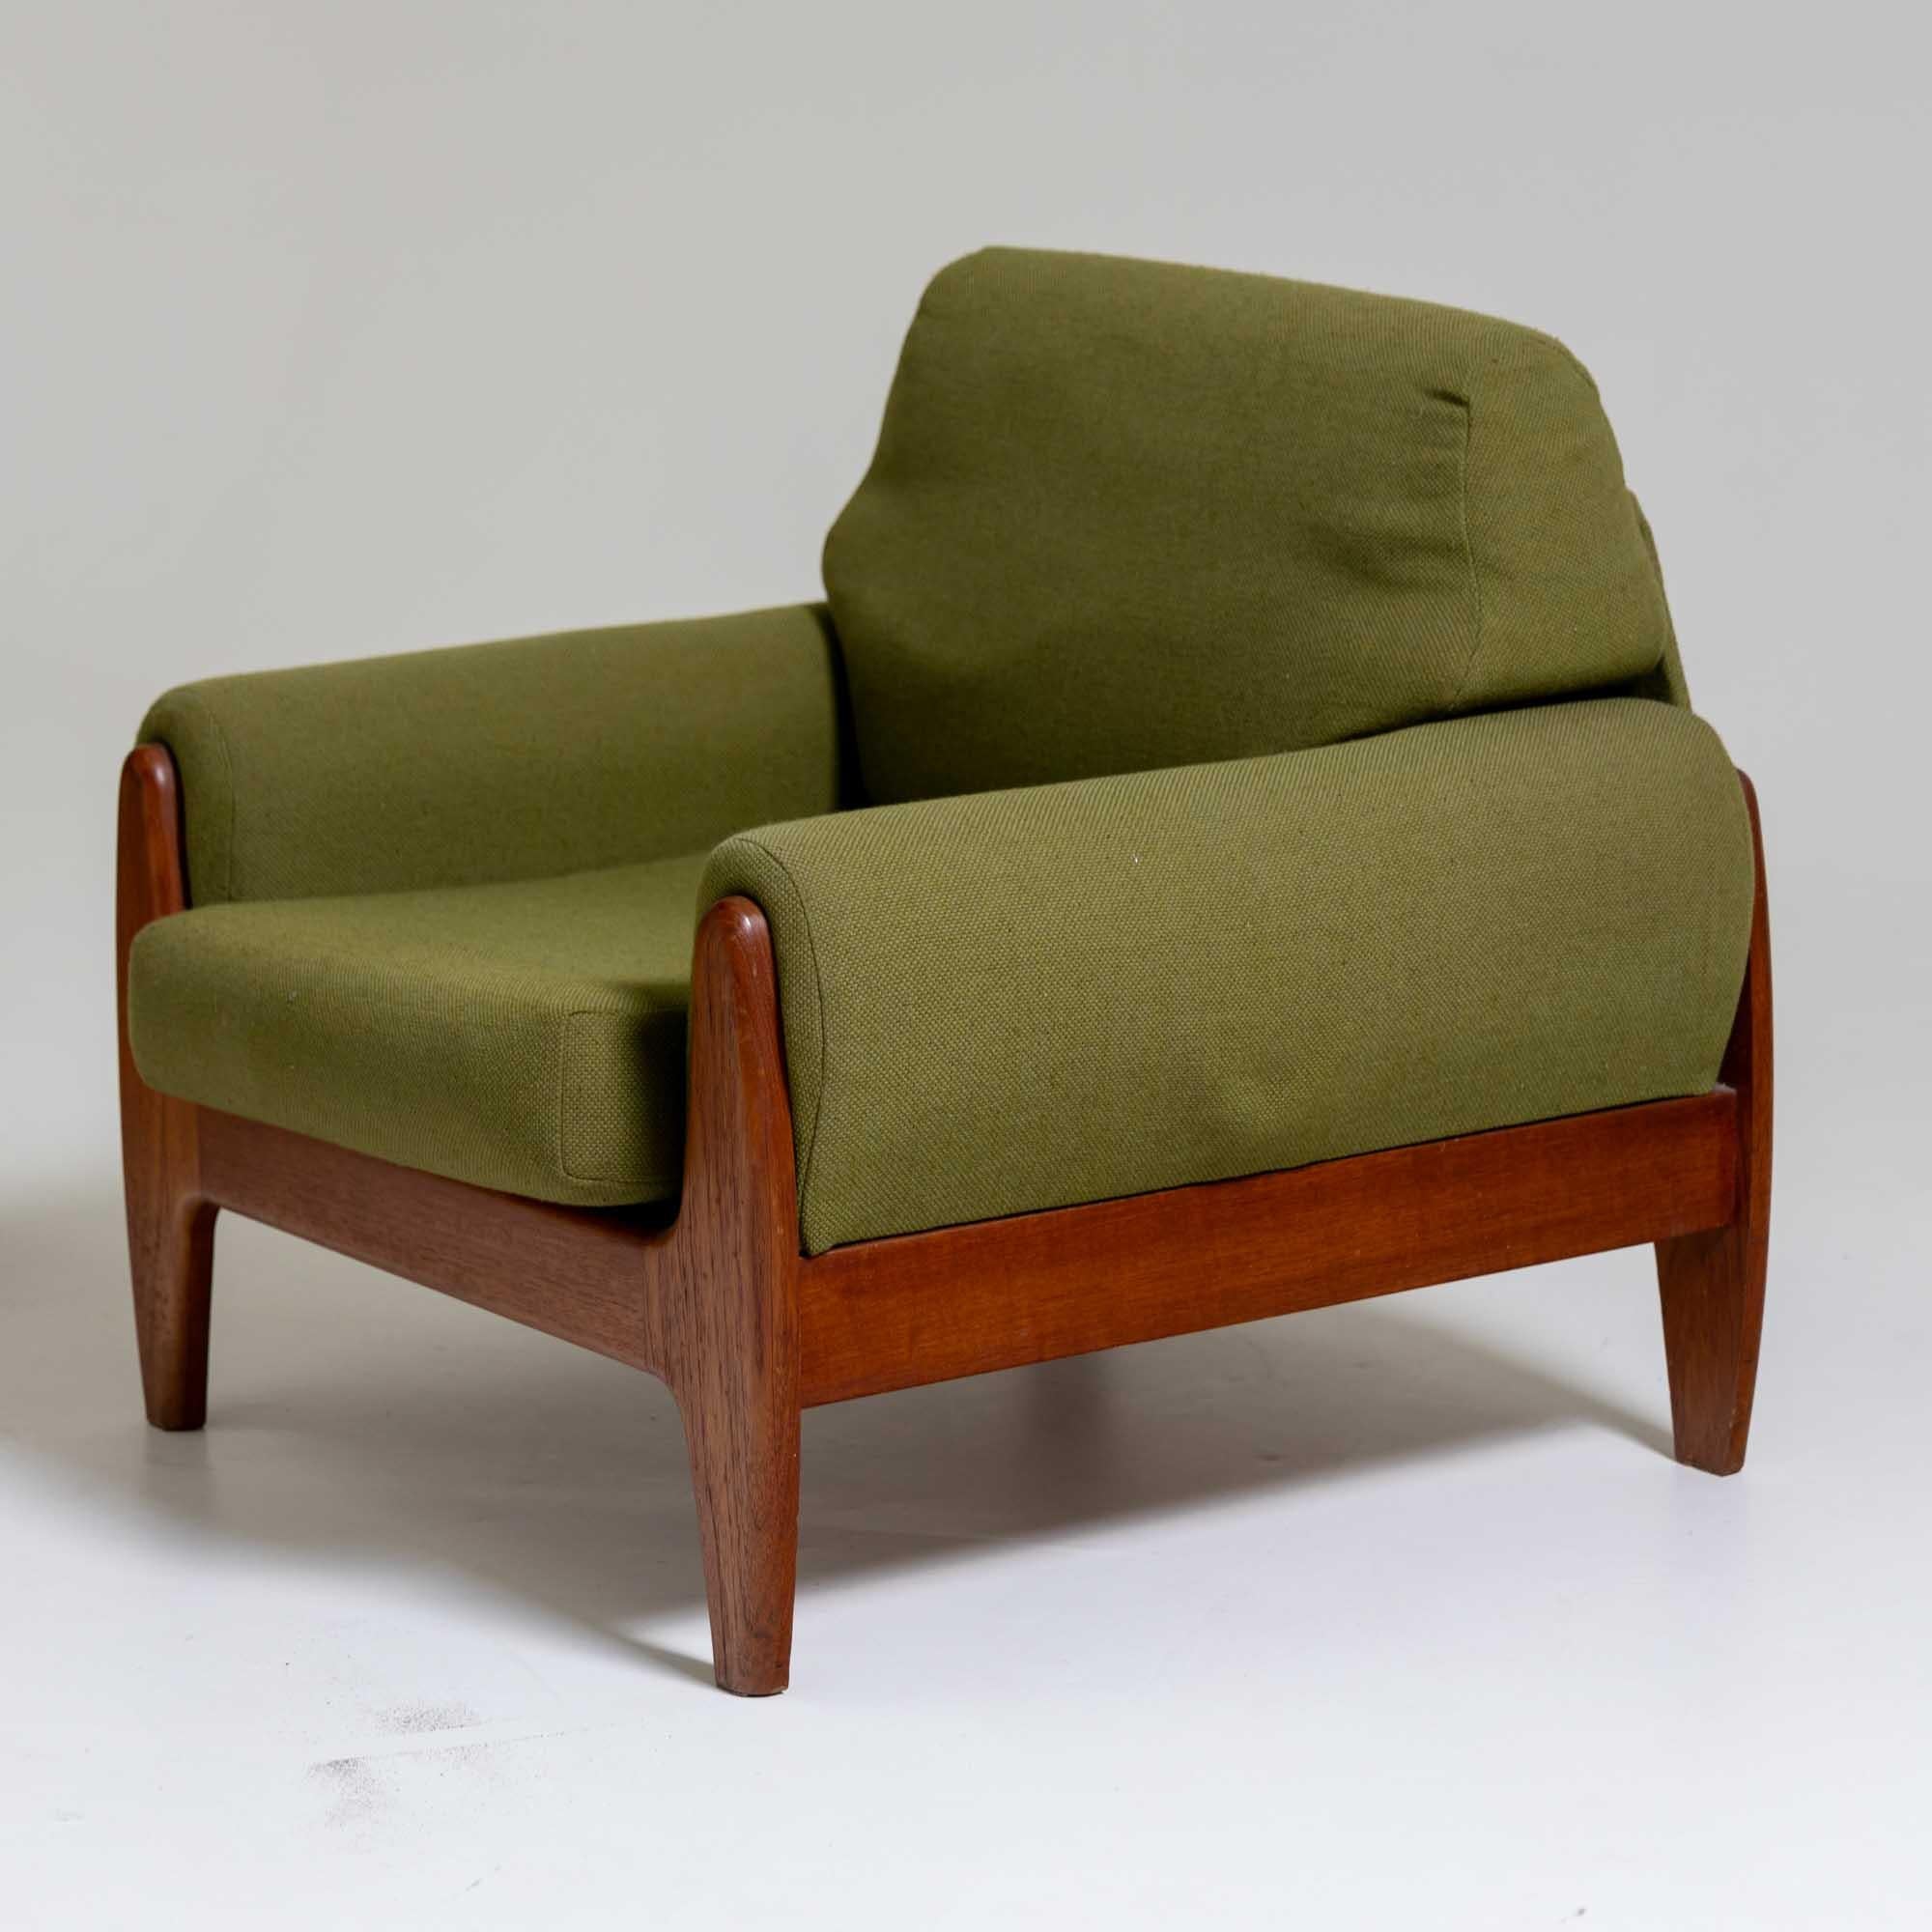 Pair of armchairs with solid teak frame and green upholstery. The armchairs are in their original unrestored condition.